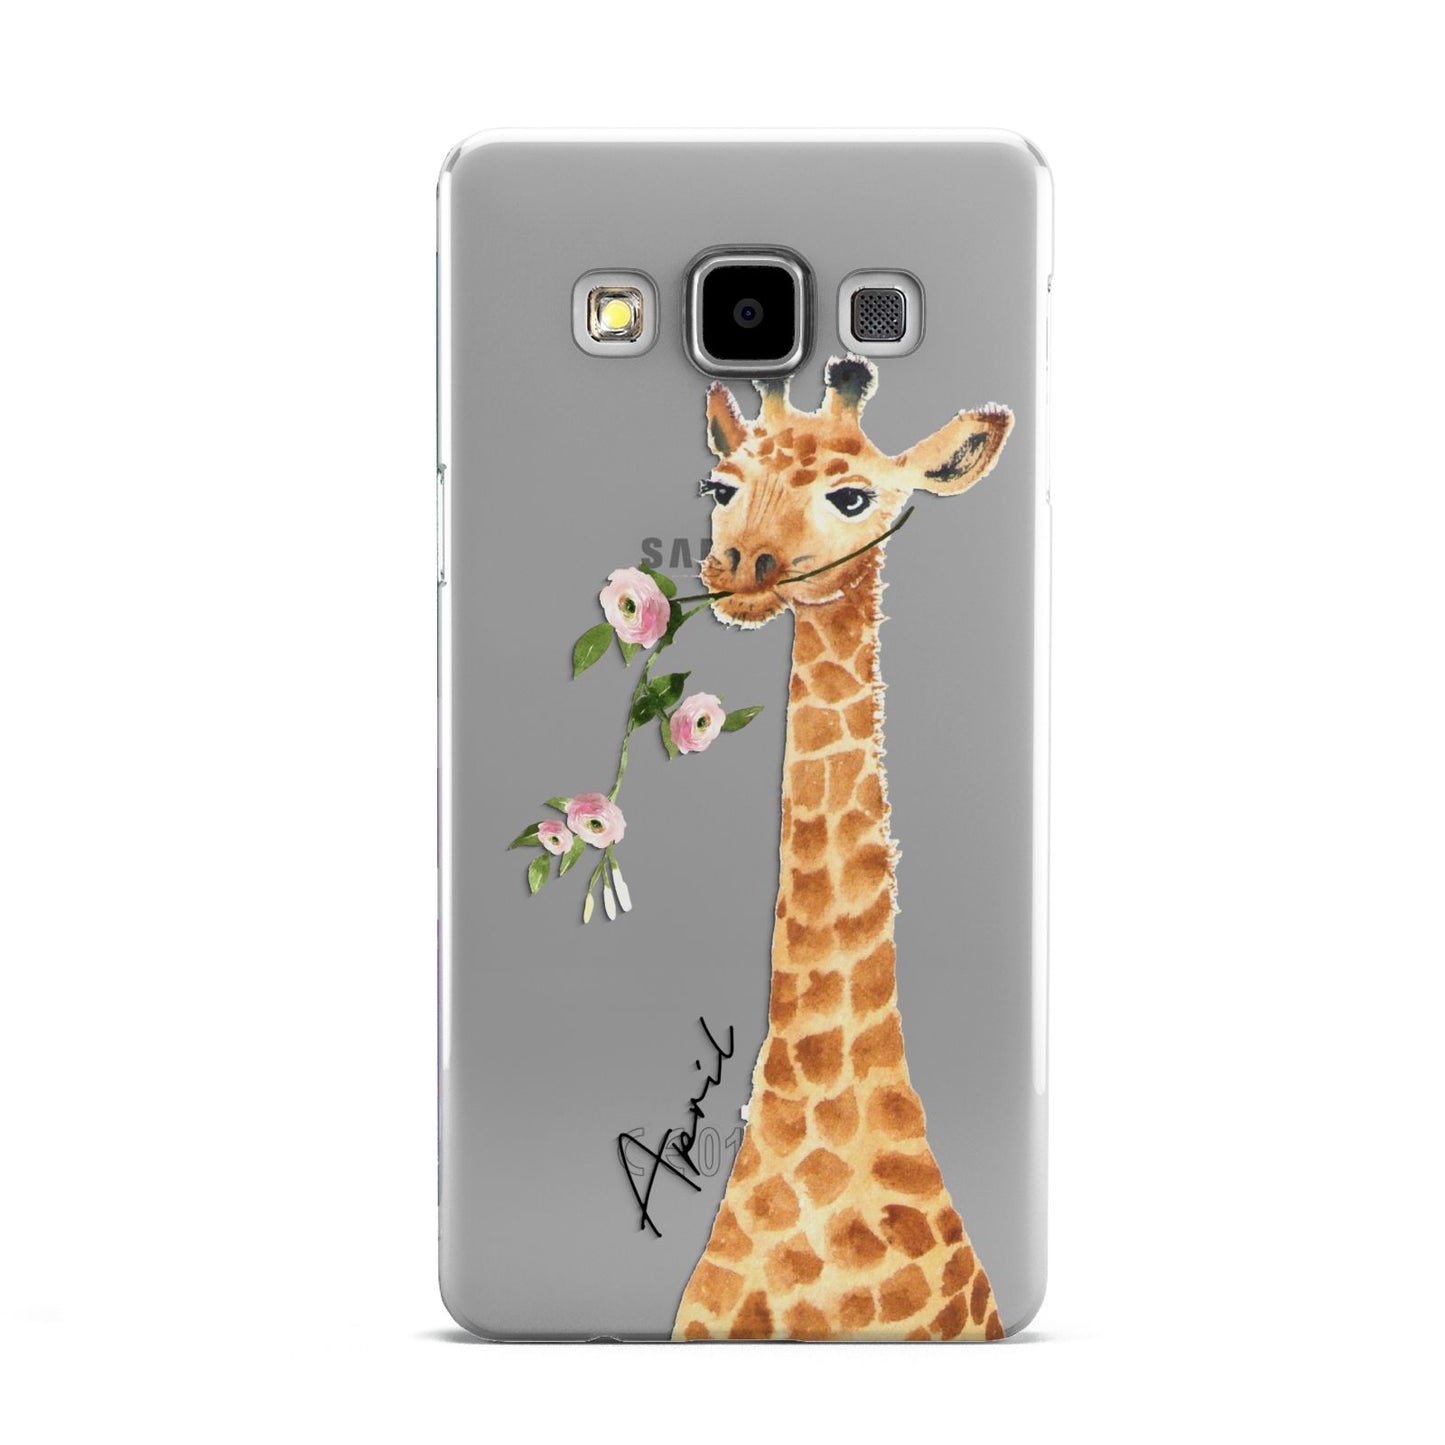 Personalised Giraffe with Name Samsung Galaxy A5 Case